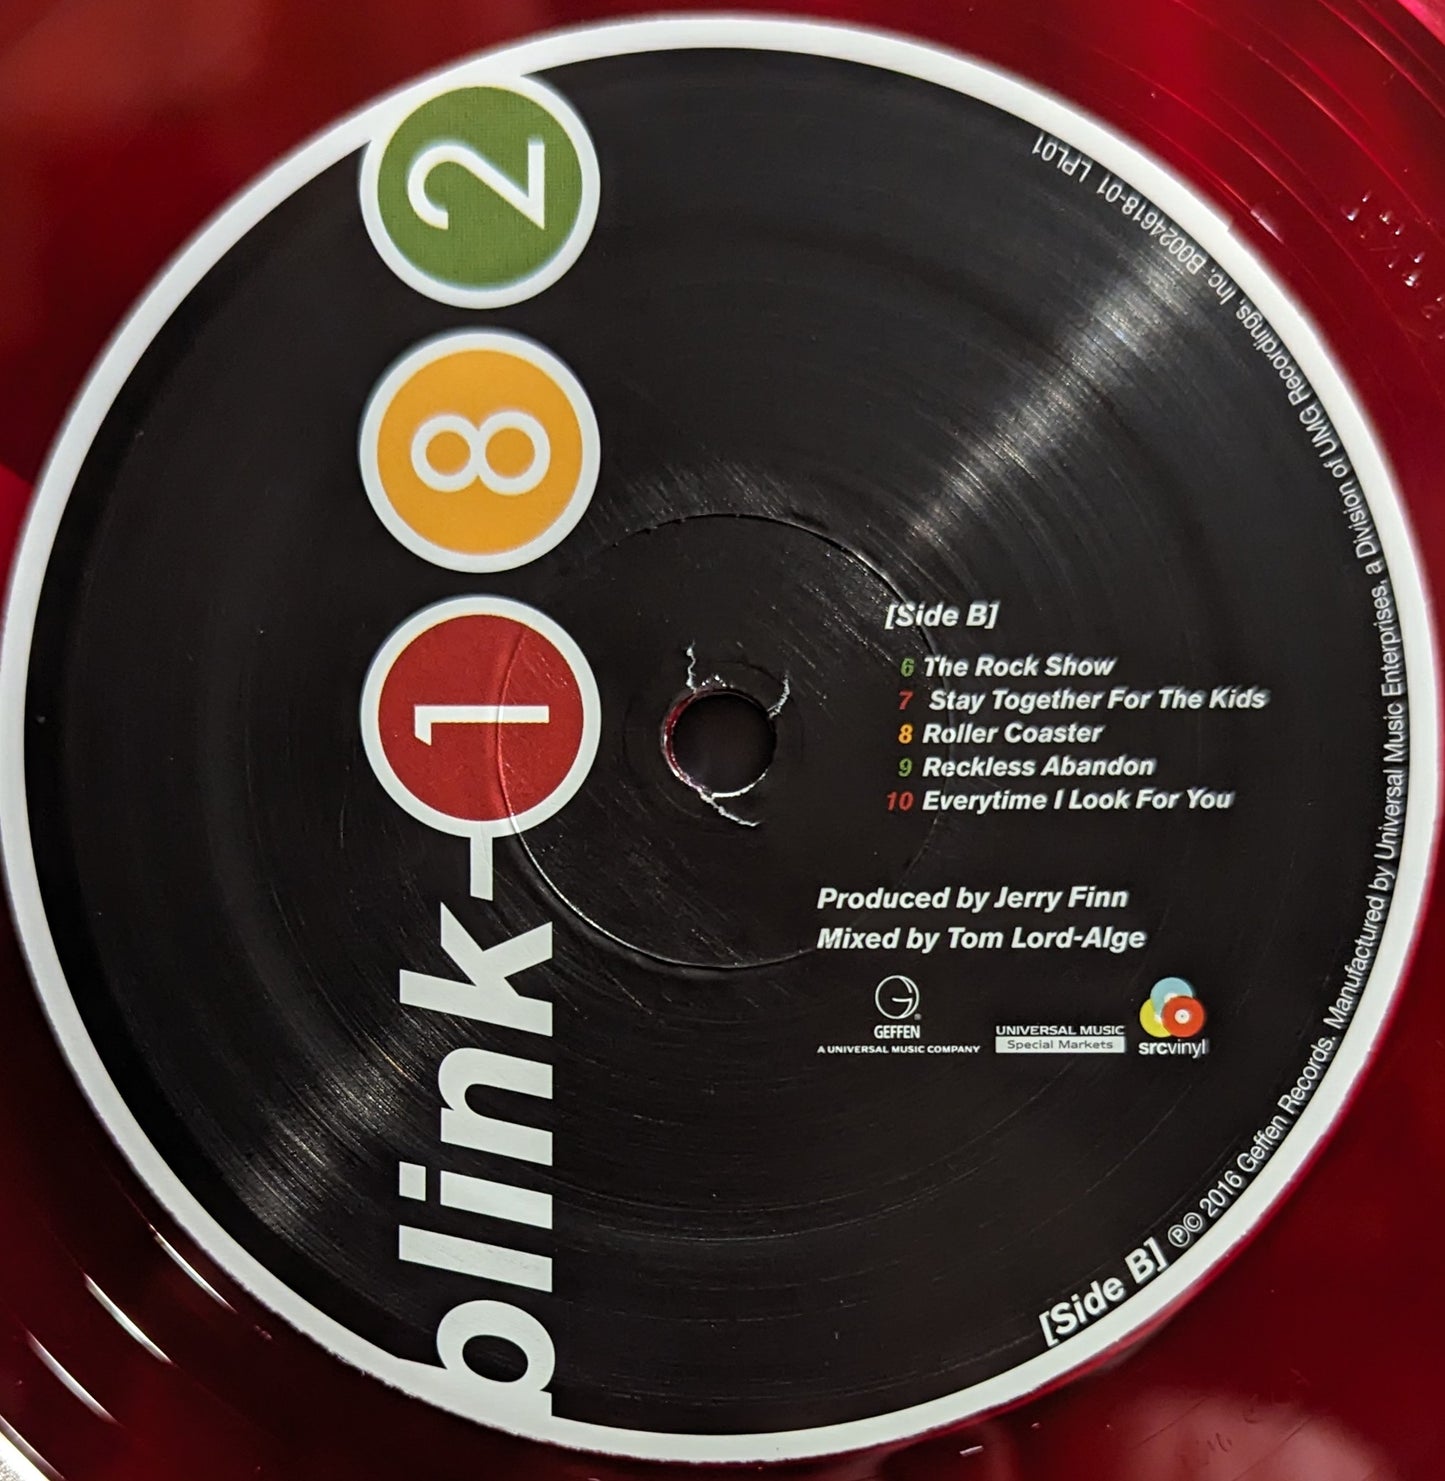 Blink-182 Take Off Your Pants And Jacket *RED* 2xLP Near Mint (NM or M-) Near Mint (NM or M-)